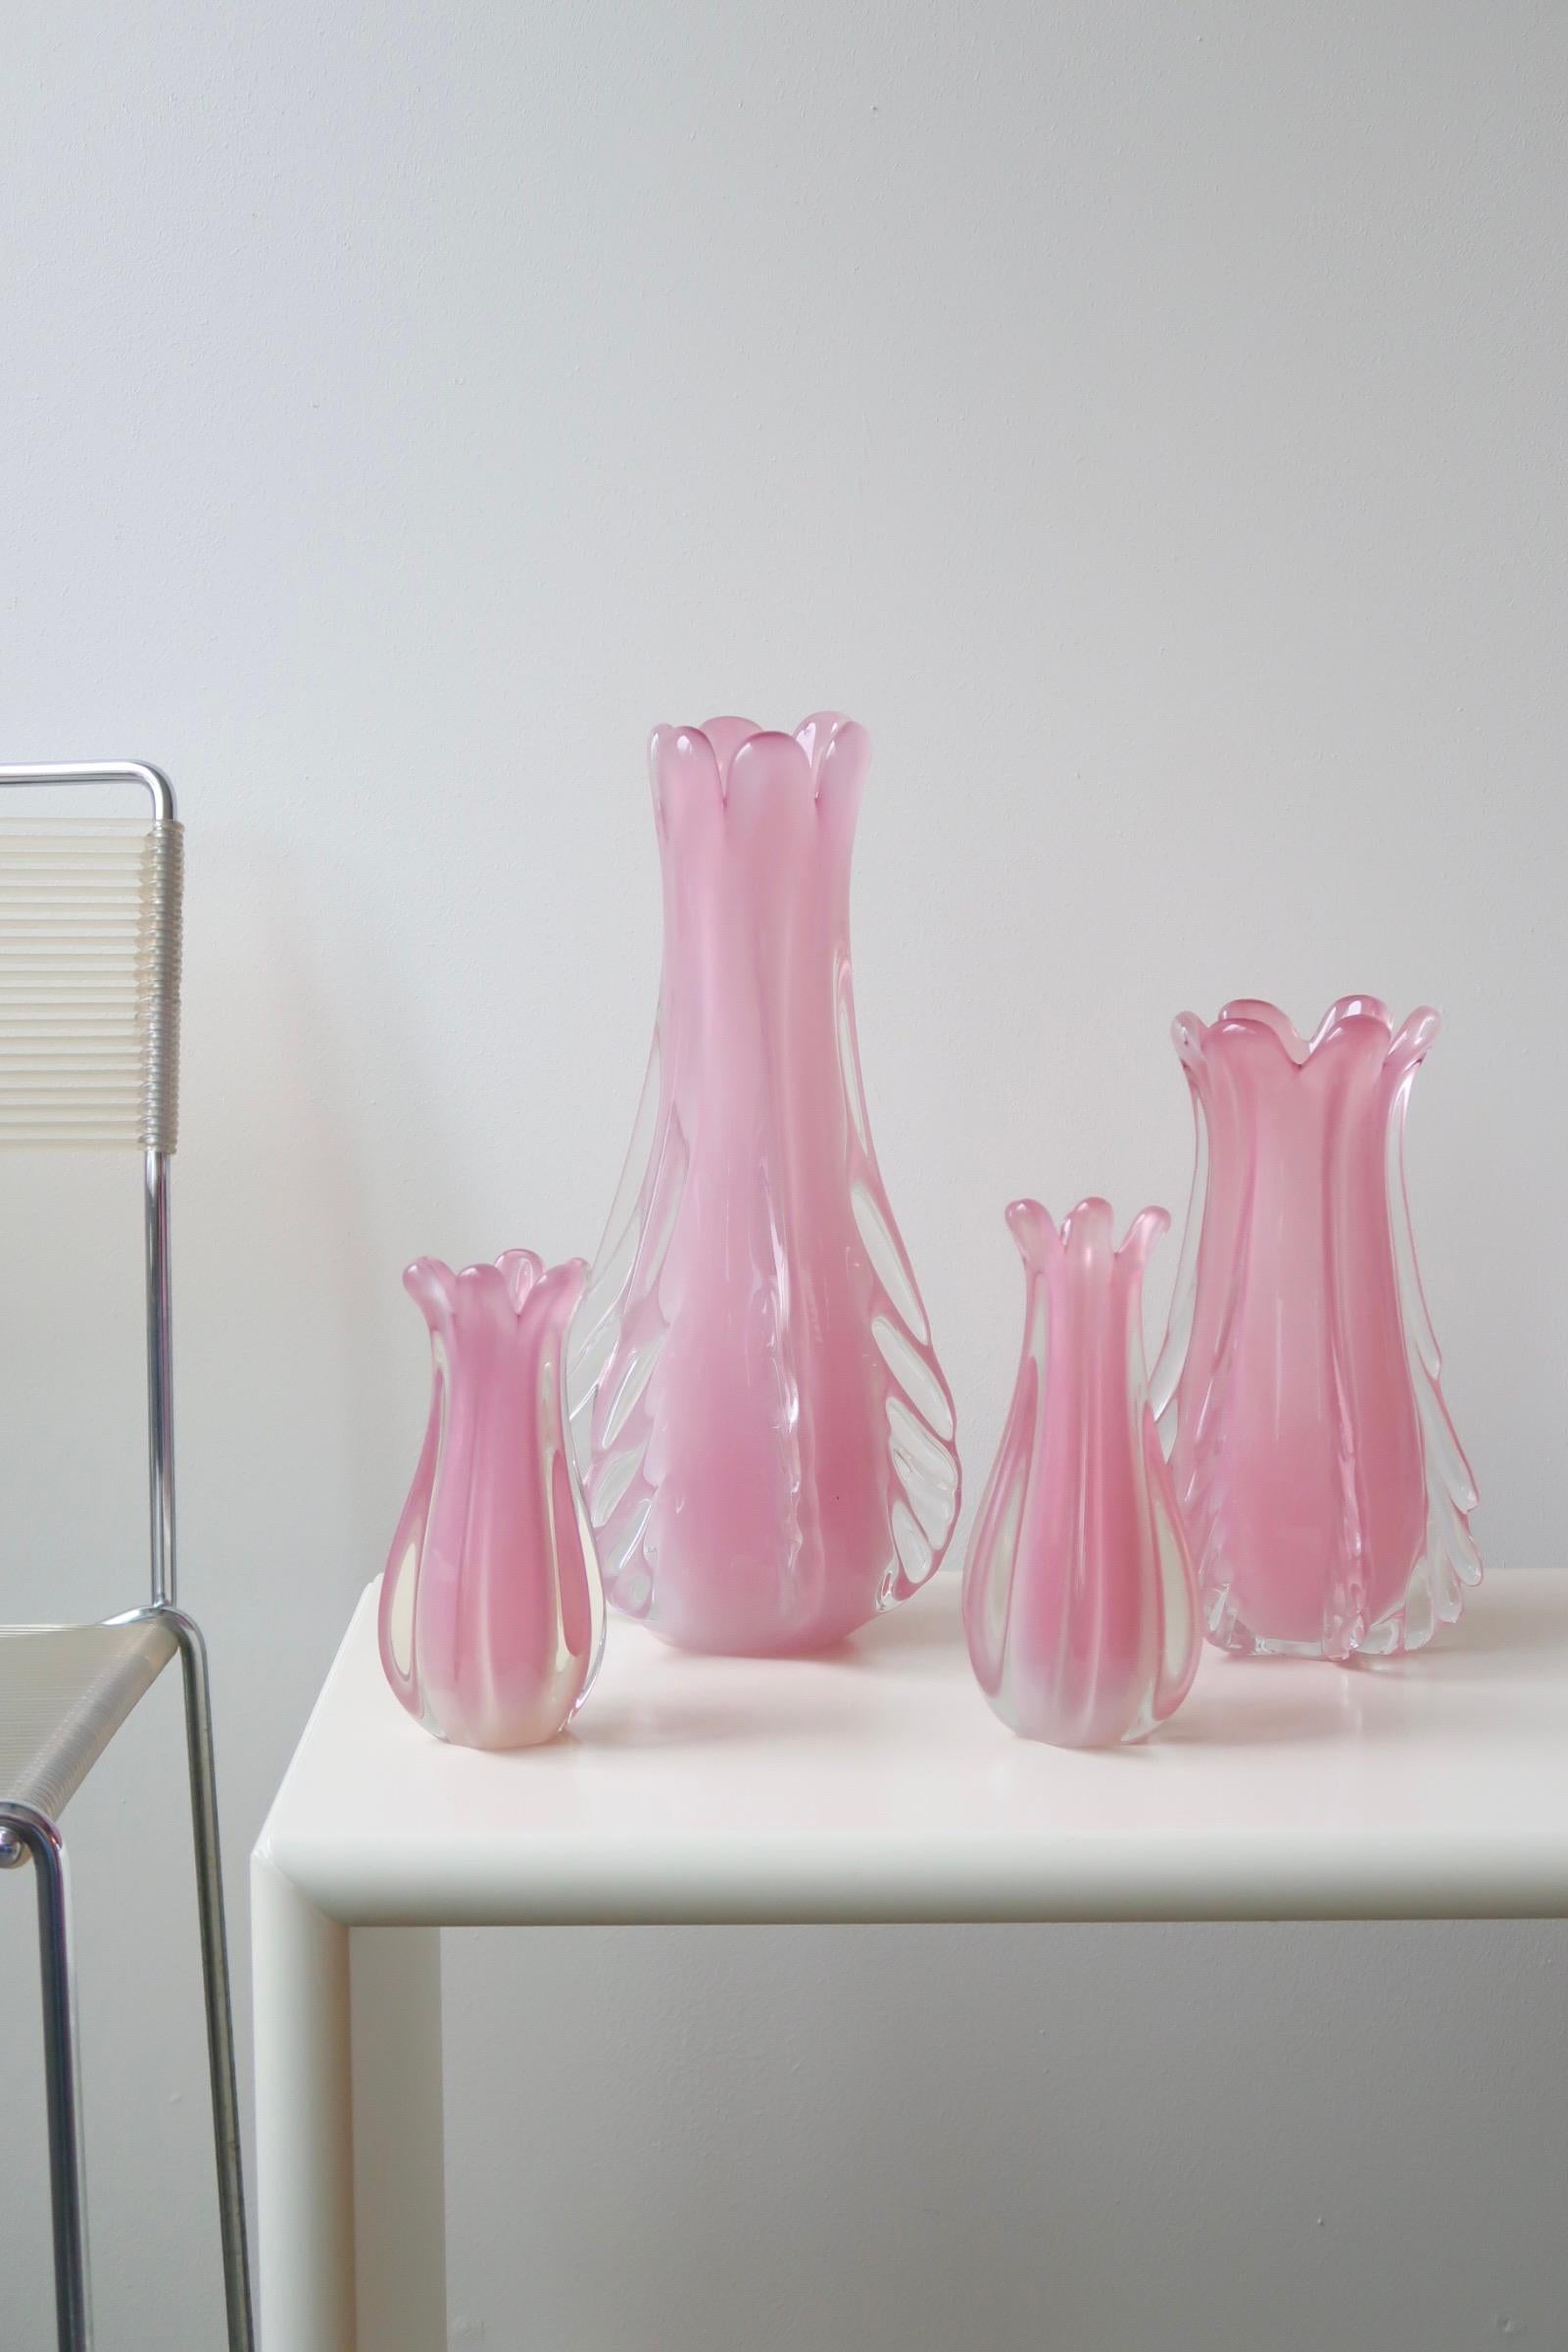 Vintage extra large Murano vase in pink / pink alabaster glass. This type of glass has become a collector's item due to its rarity and the absolutely stunning shade. The vase is mouth-blown in an organic form. Handmade in Italy, 1950/60s.

H:36 cm